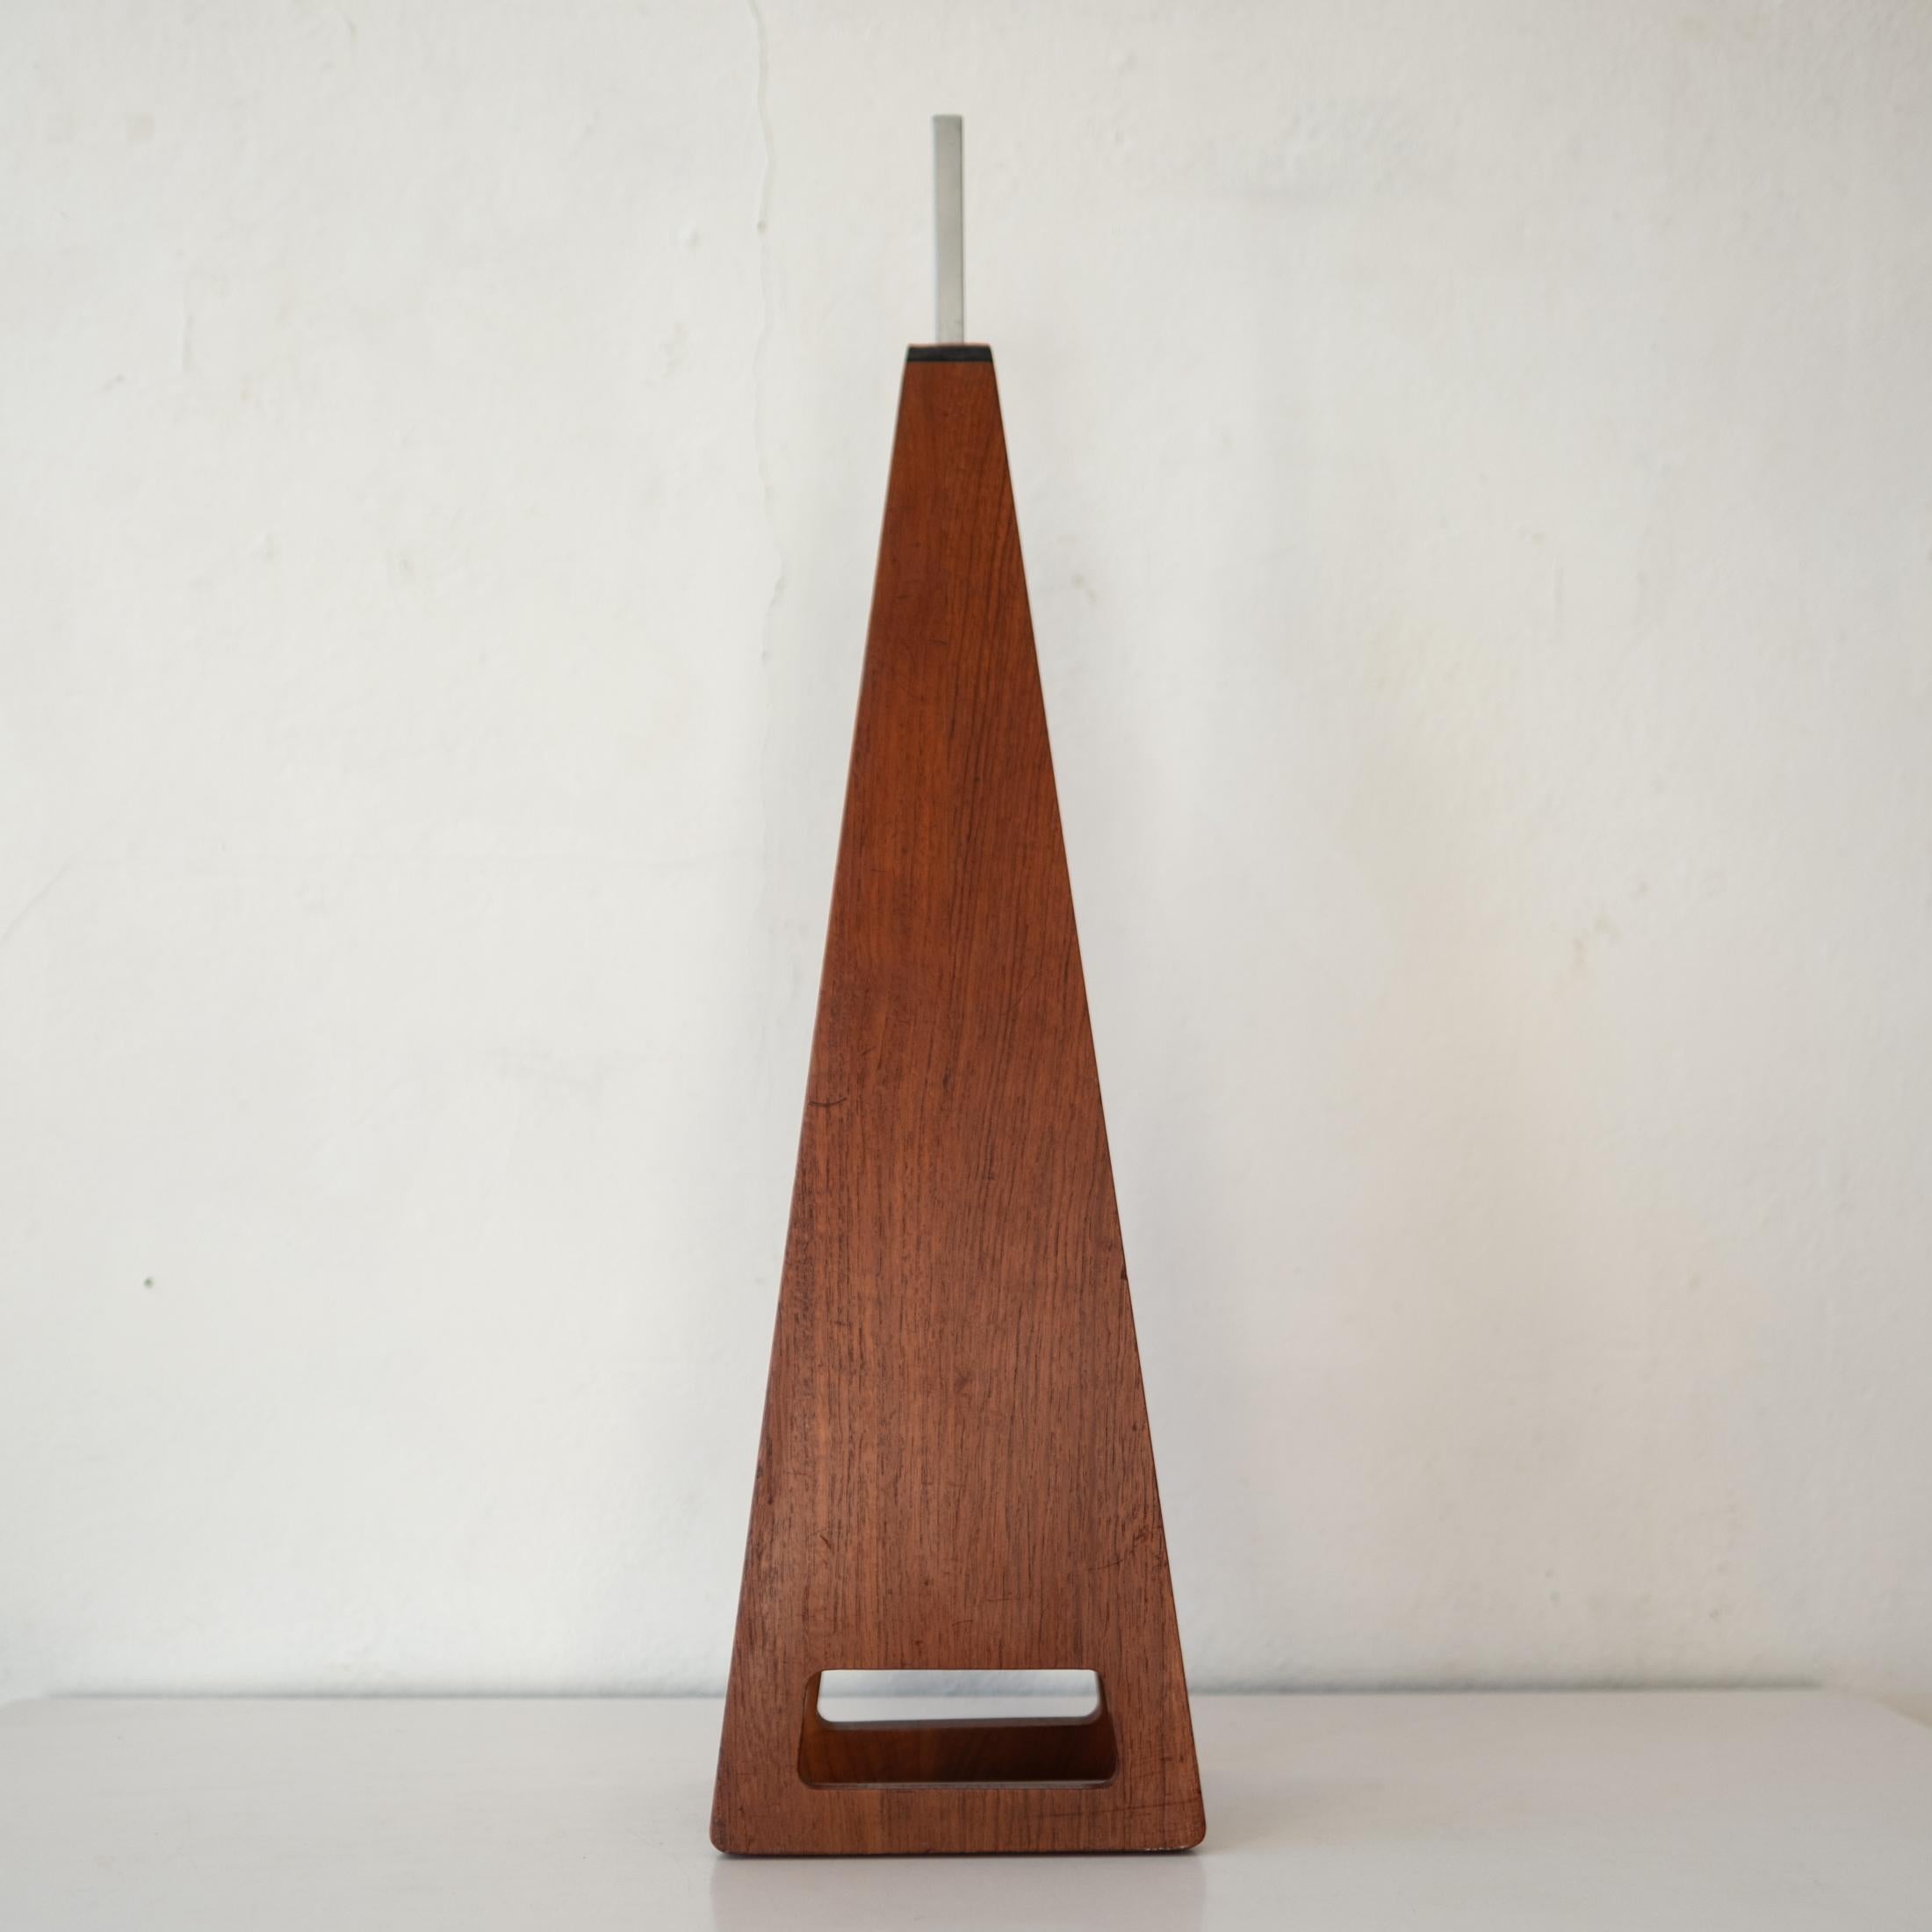 Very hard to find Skjode teak and suede fireplace bellows. Designed by Skjode Knudsen, 1960s. Made in Denmark. 

Great minimalist and functional design. Suede bellows are soft and in good shape.  

